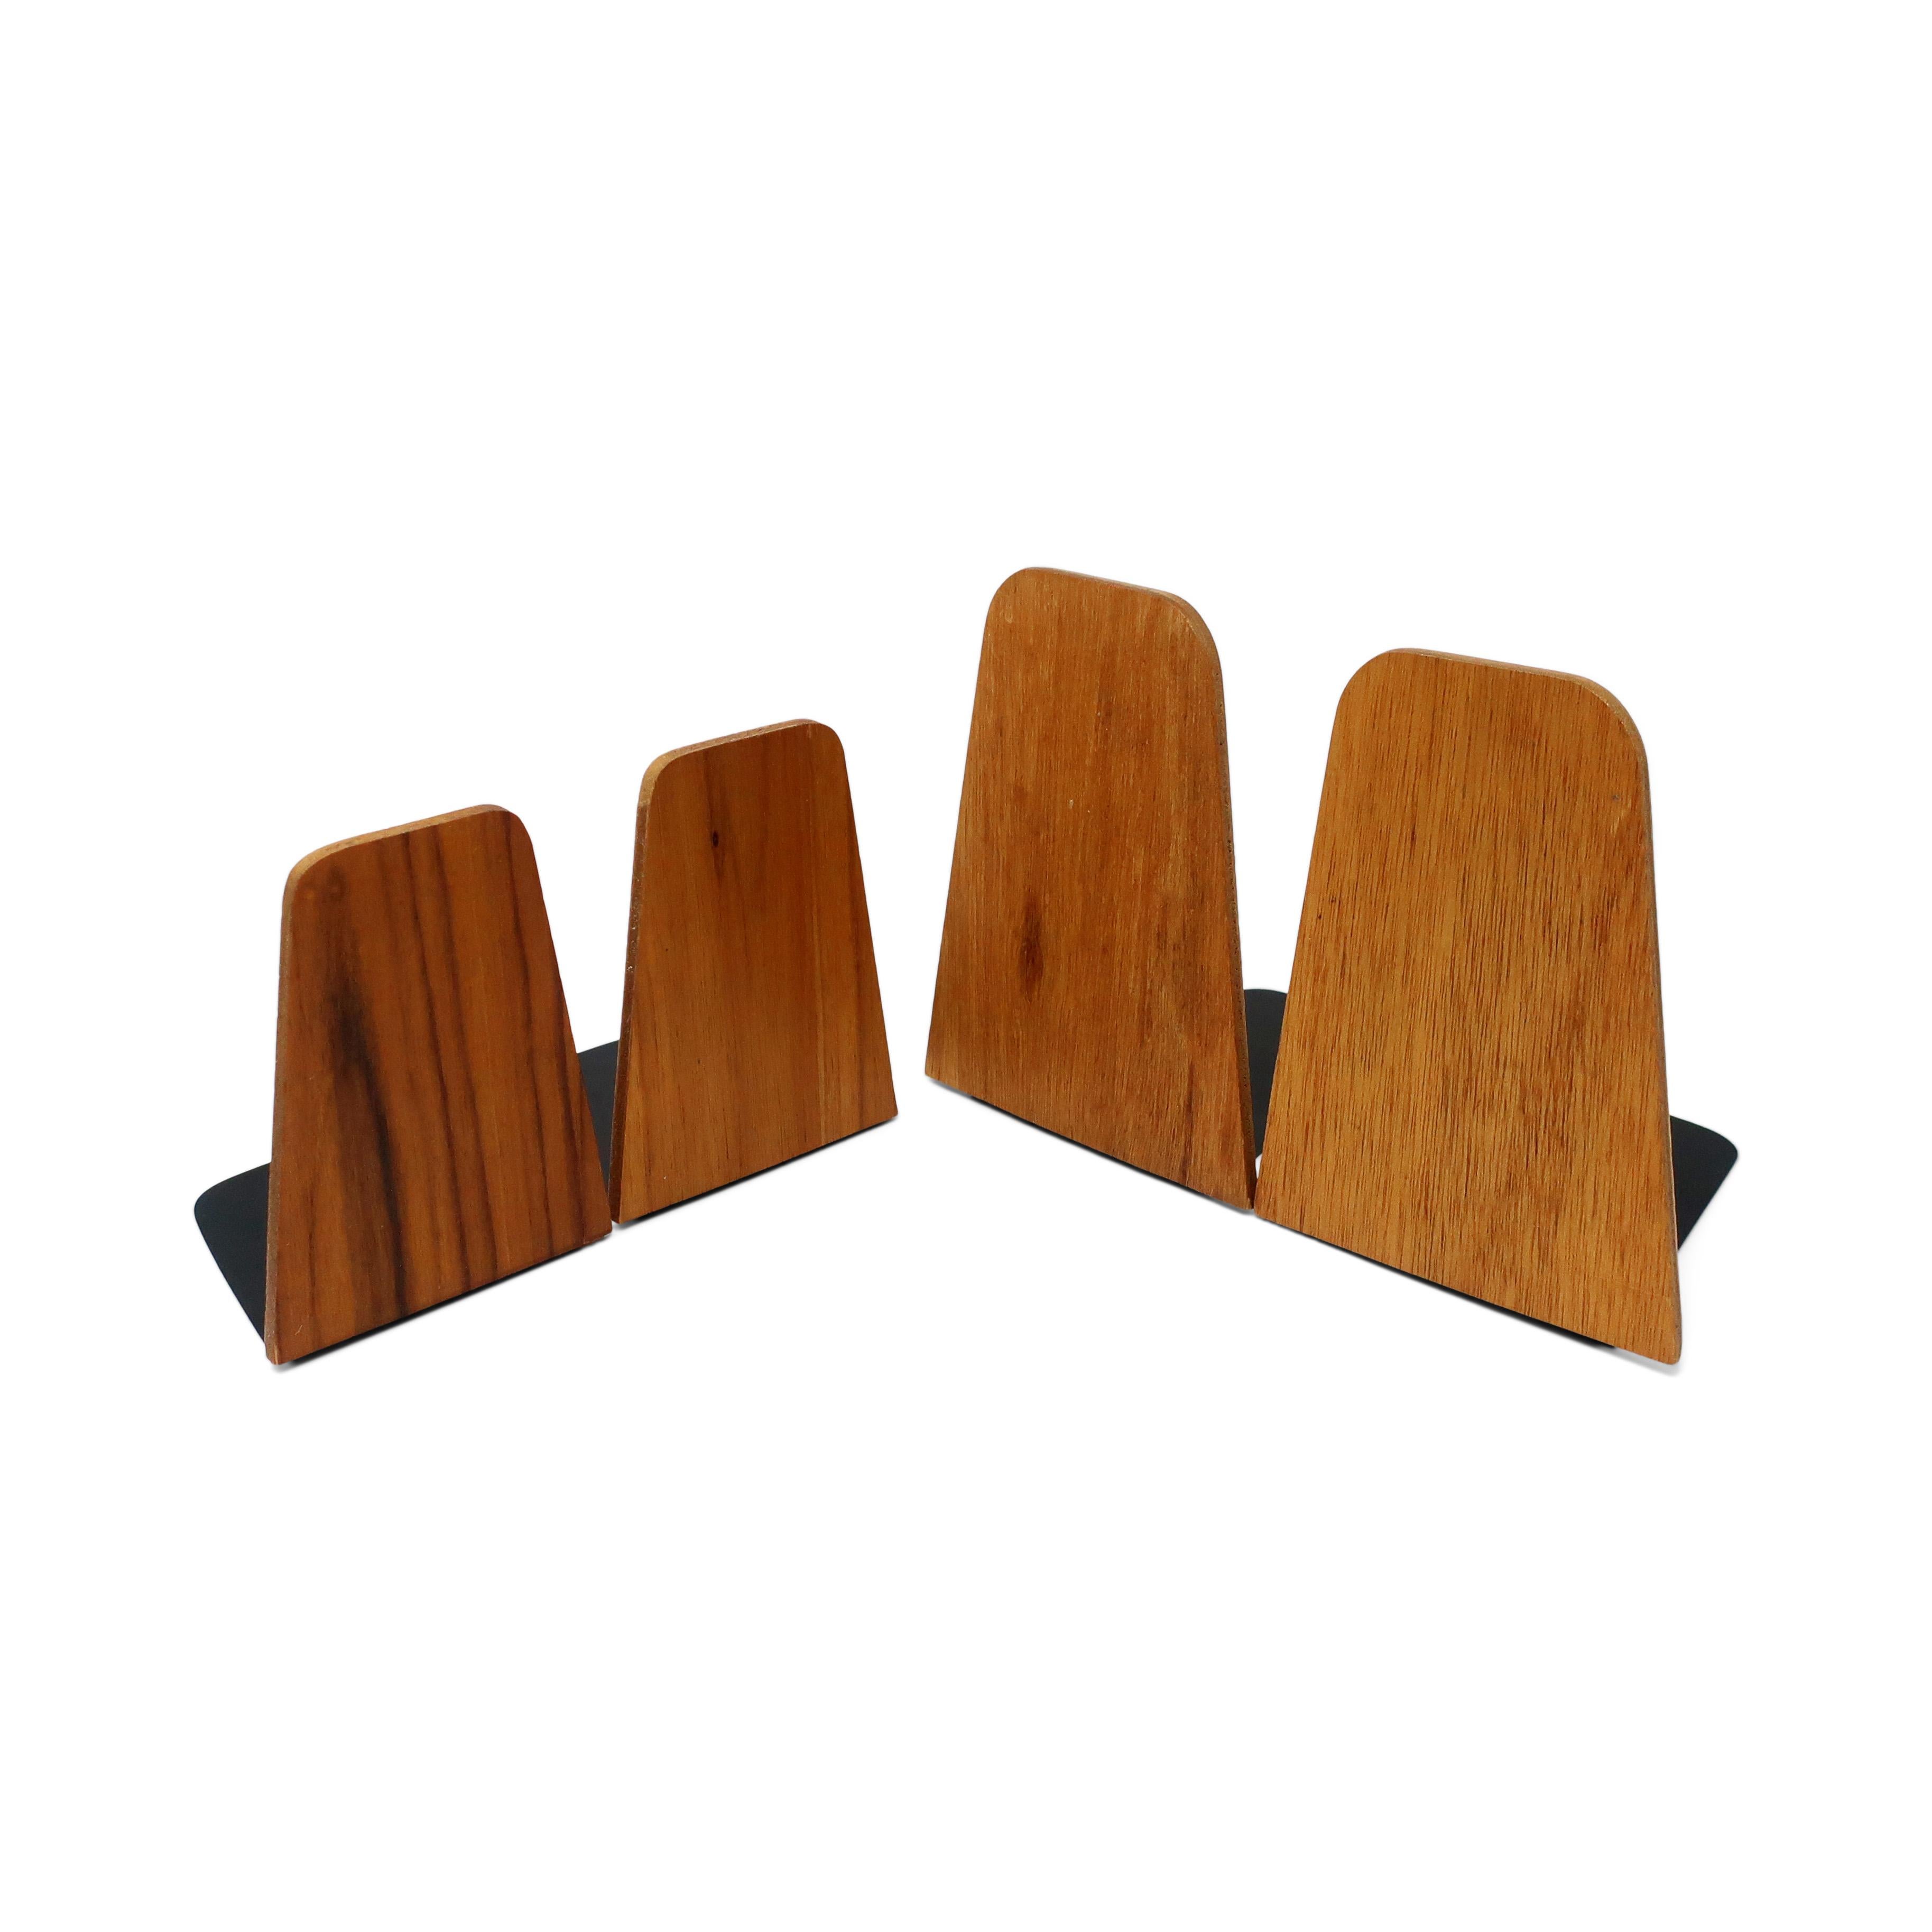 Two pairs of functional and simple teak bookends exemplifying the best of mid-century and Danish modern design. Extremely lightweight but able to hold lots of book due to their design, which is attributed to Kai Kristiansen for Fornem Møbelkunst.